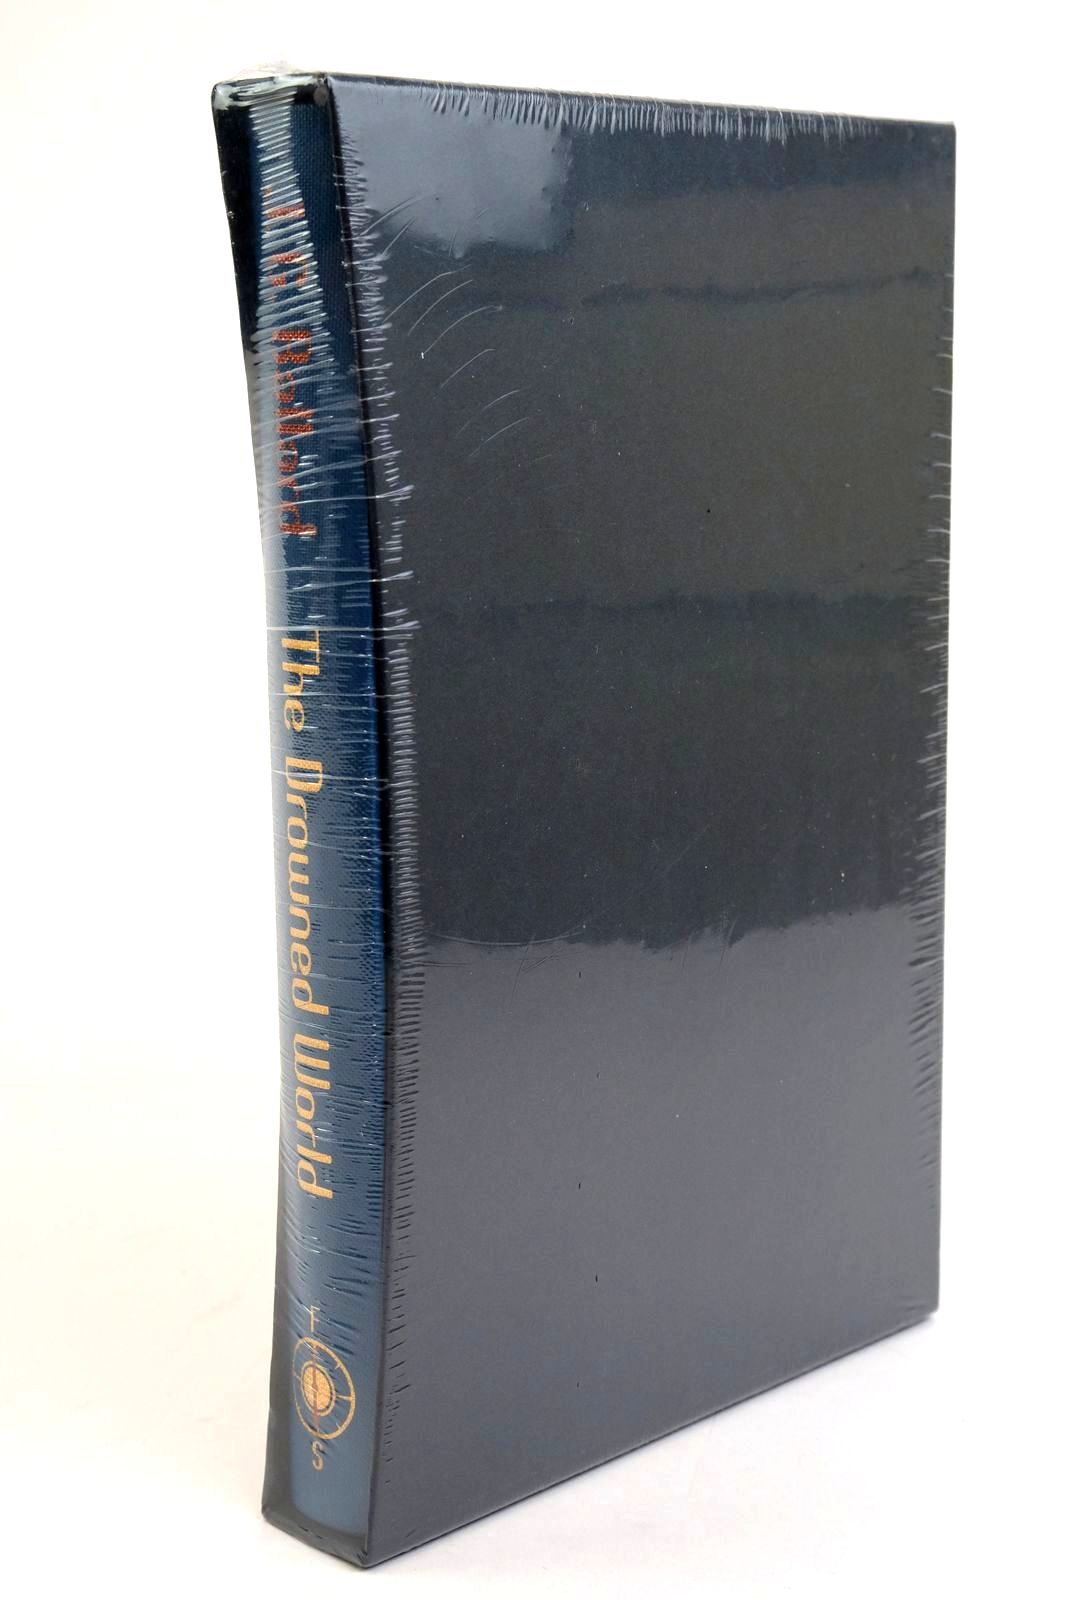 Photo of THE DROWNED WORLD written by Ballard, J.G. Self, Will illustrated by Boswell, James published by Folio Society (STOCK CODE: 1321742)  for sale by Stella & Rose's Books